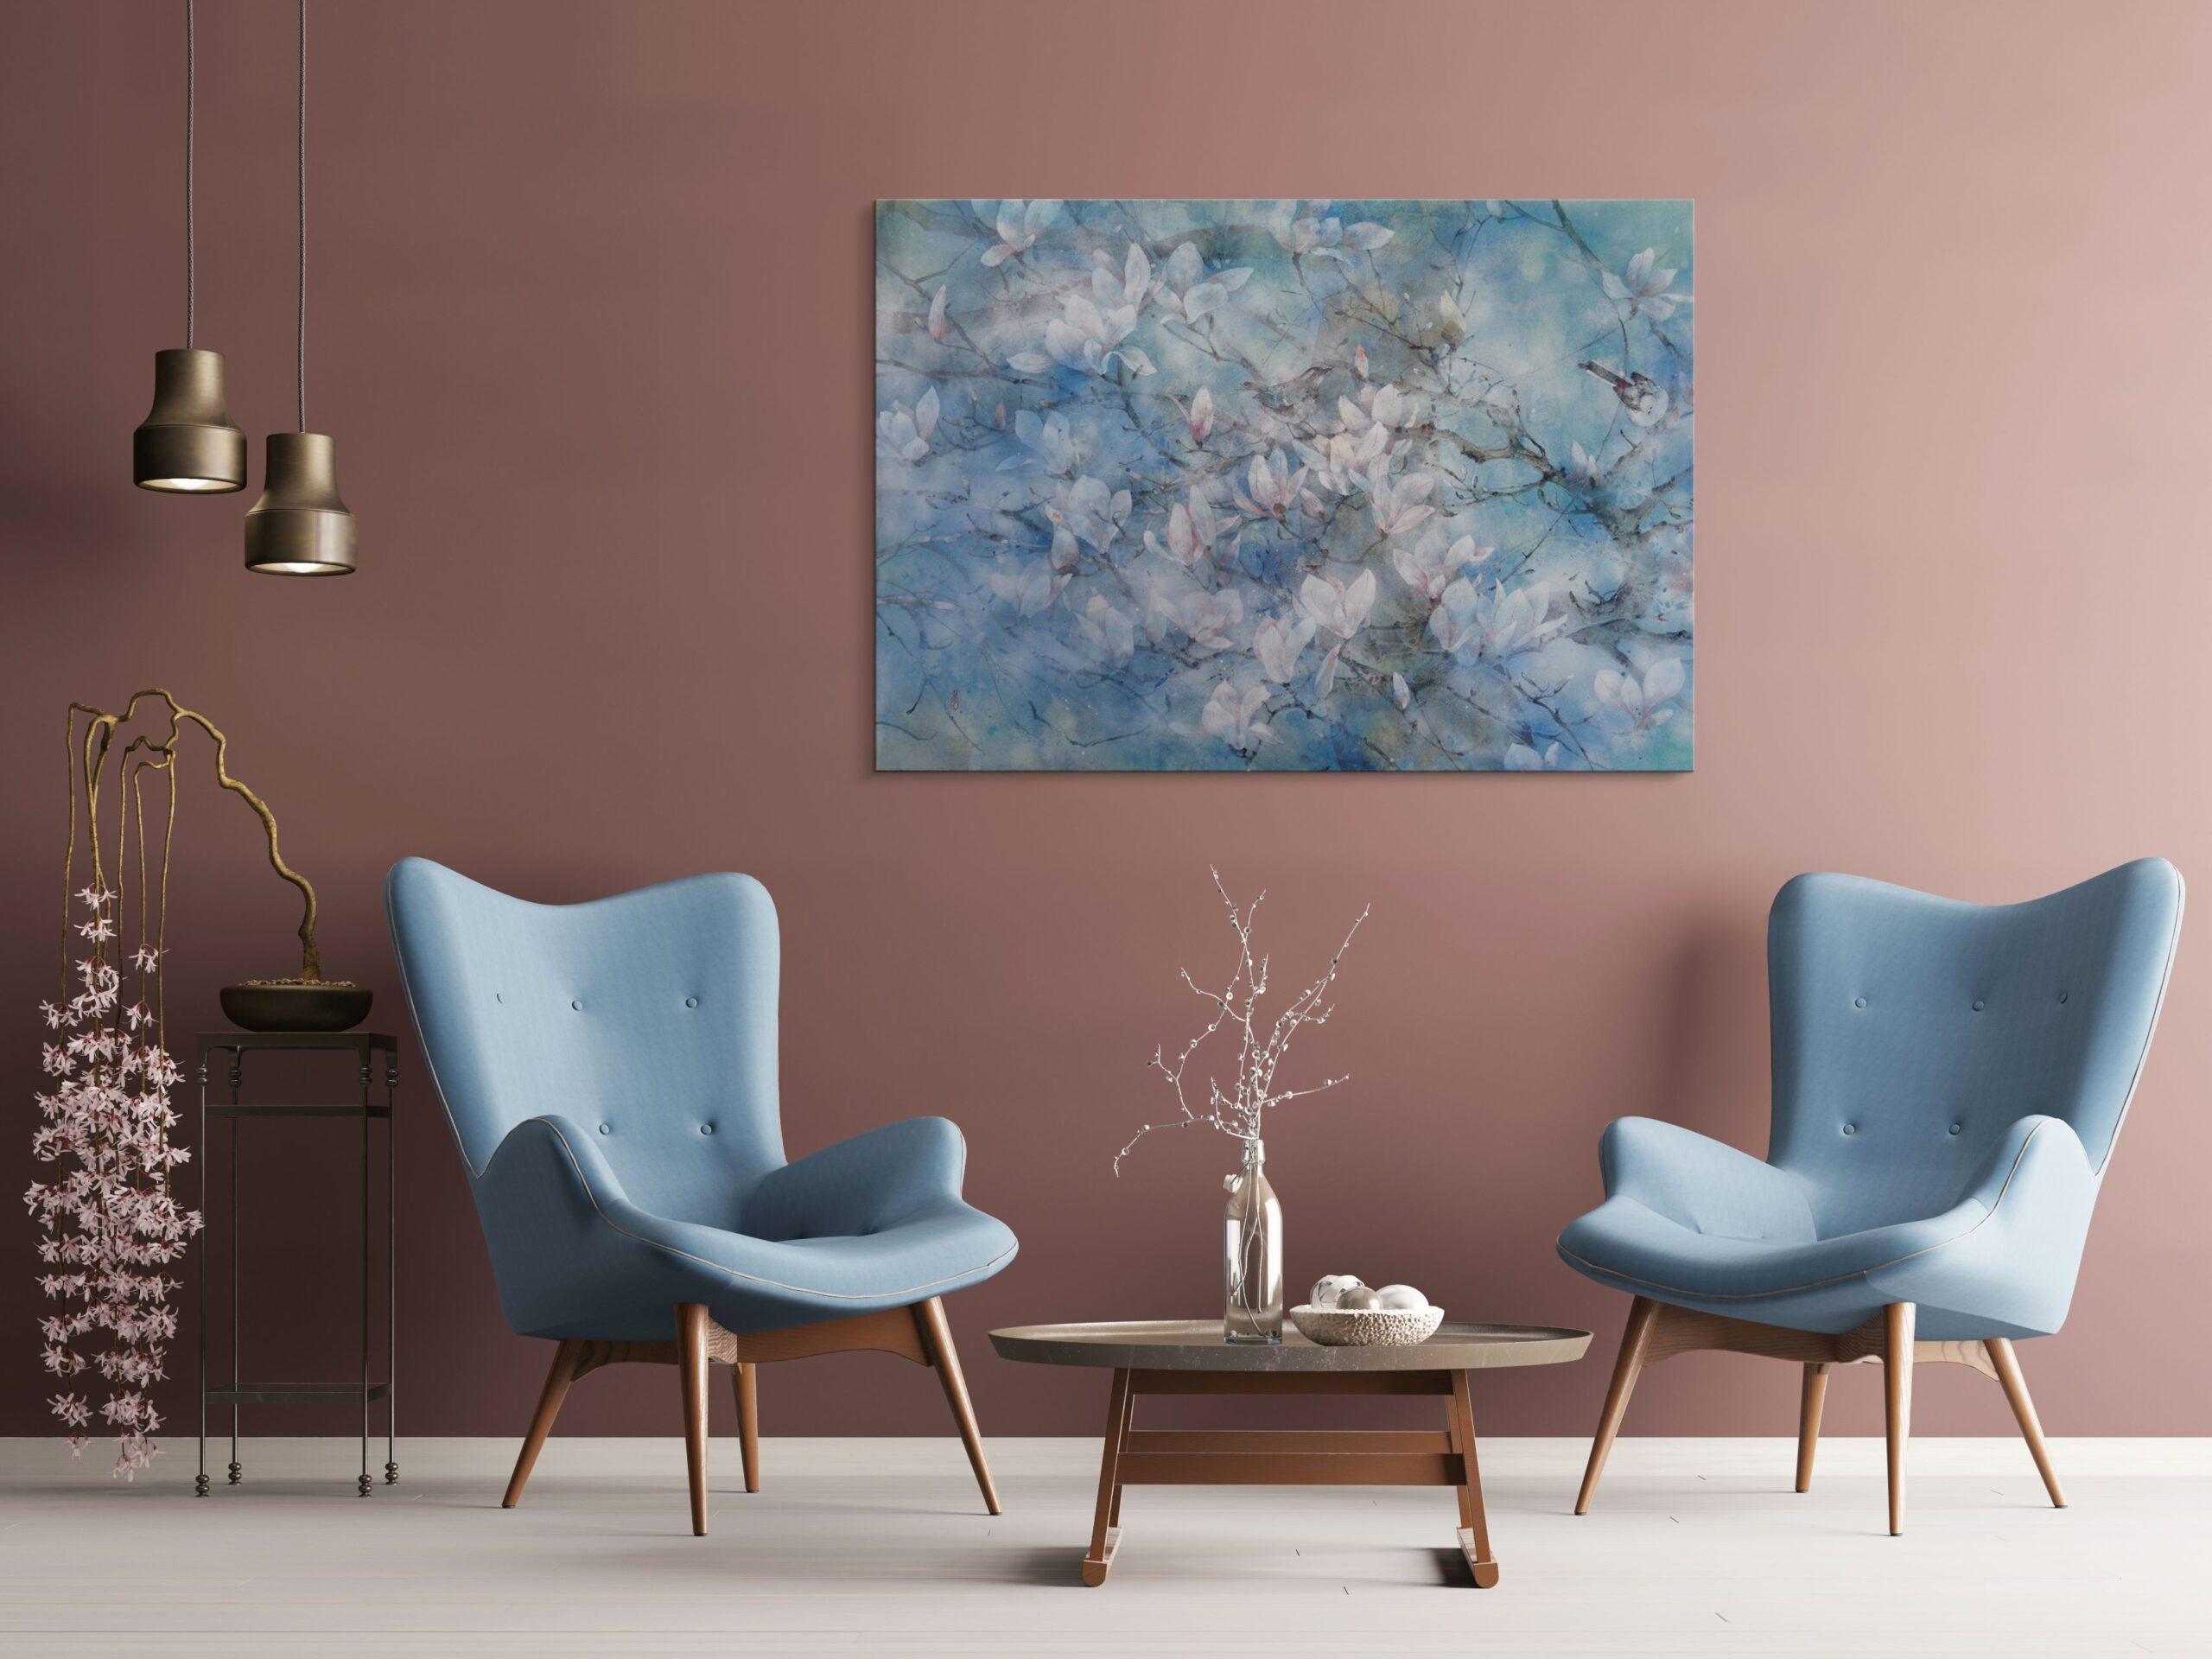 The spring wind by Chen Yiching - Contemporary nihonga painting, magnolia flower - Painting by Yiching Chen